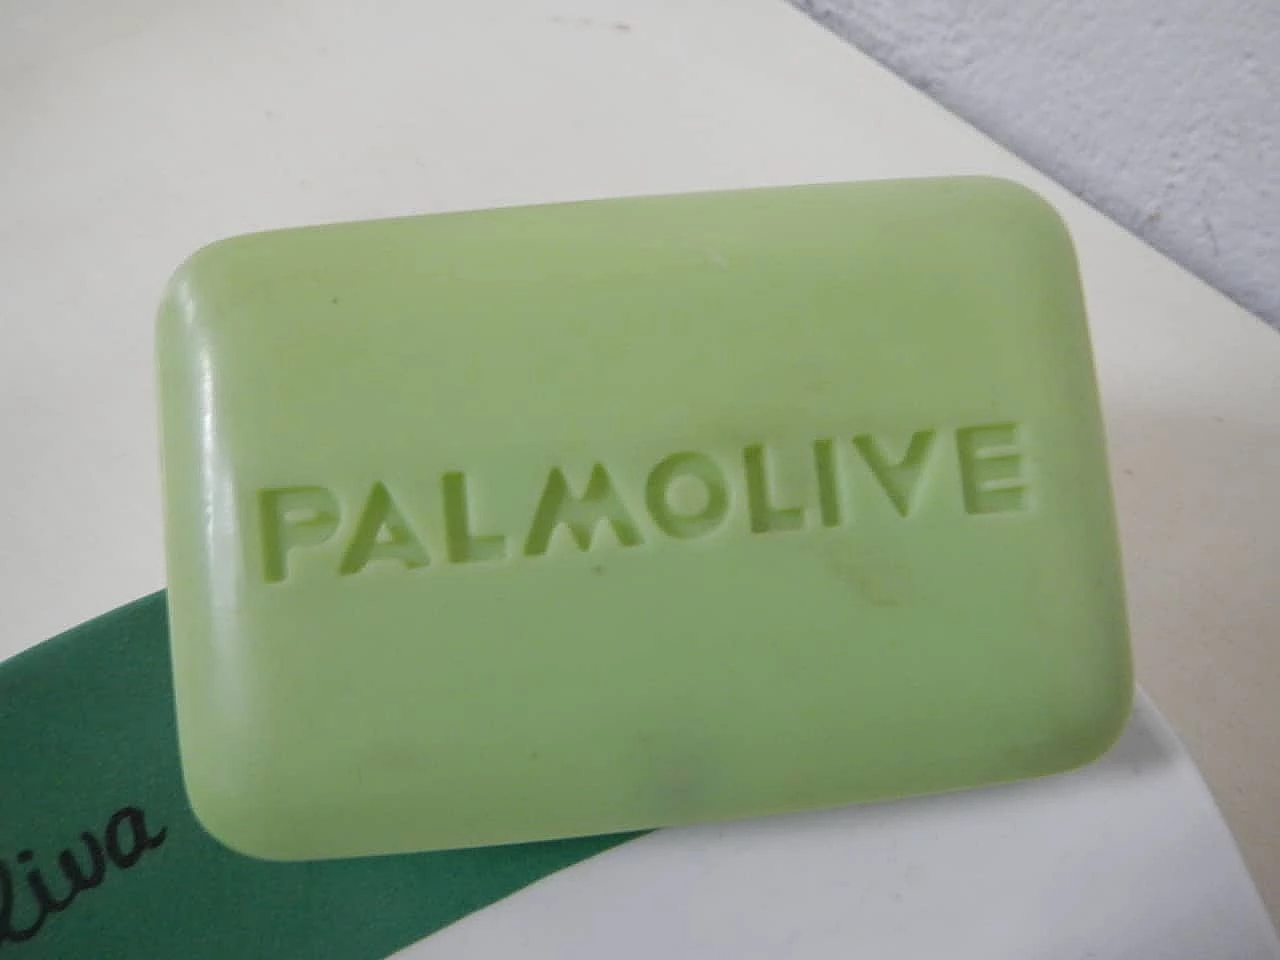 Palmolive advertising container, 1960s 4